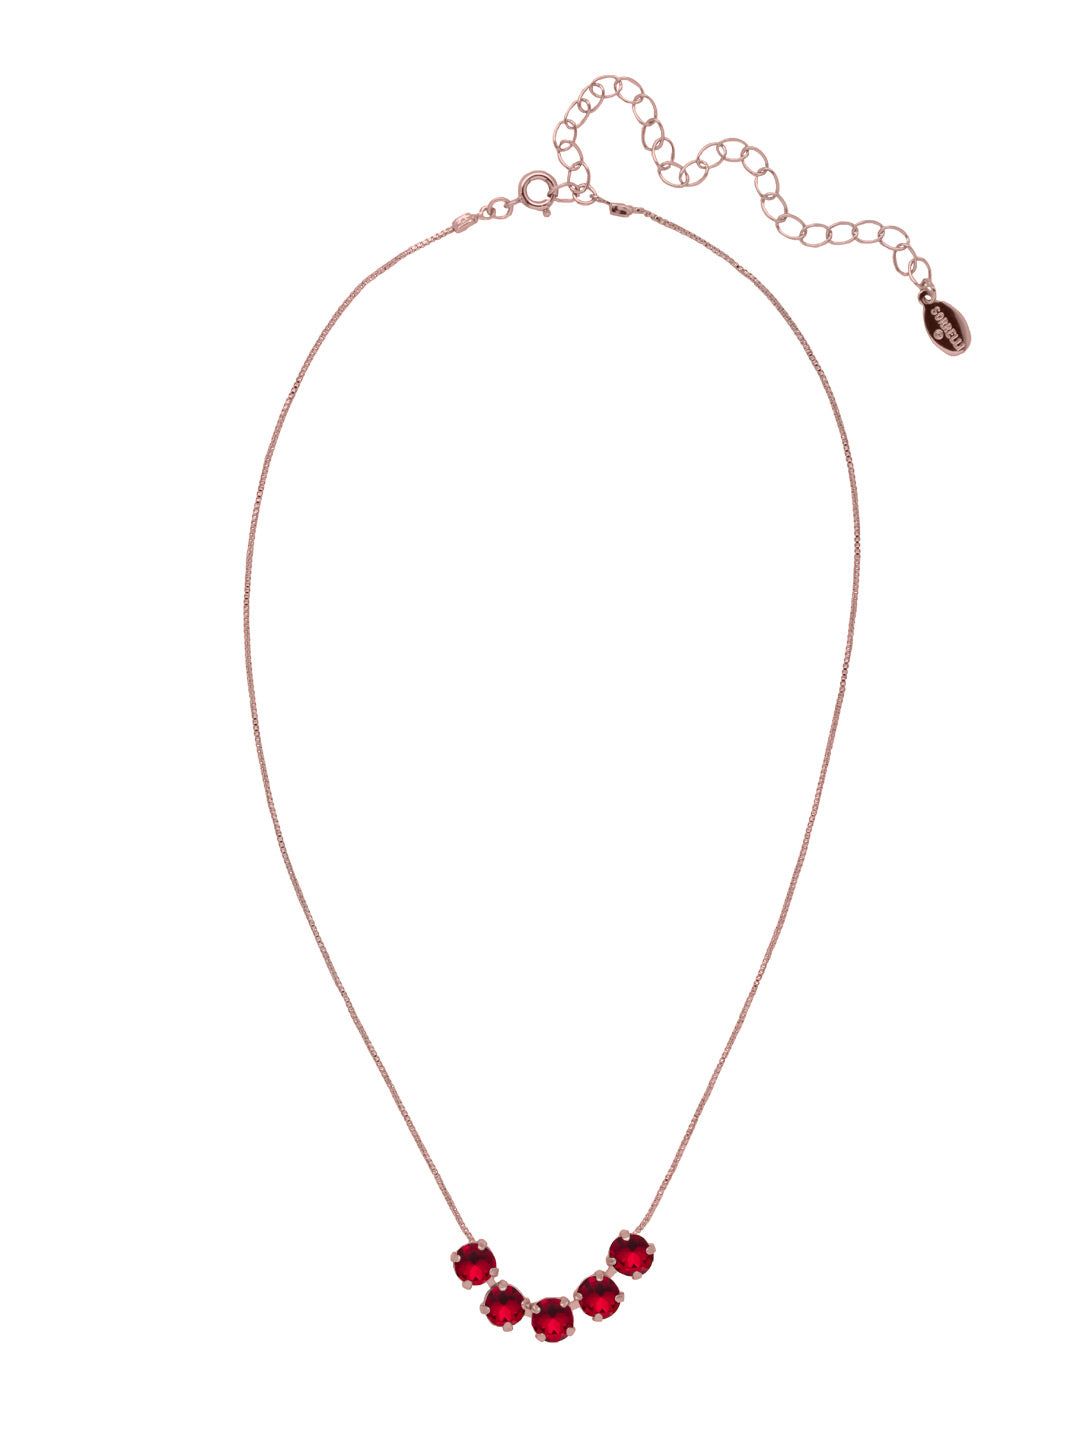 Shaughna Tennis Necklace - NFC84RGSI - <p>The Shaughna Tennis Necklace features five crystals on a delicate adjustable chain. From Sorrelli's Siam collection in our Rose Gold-tone finish.</p>